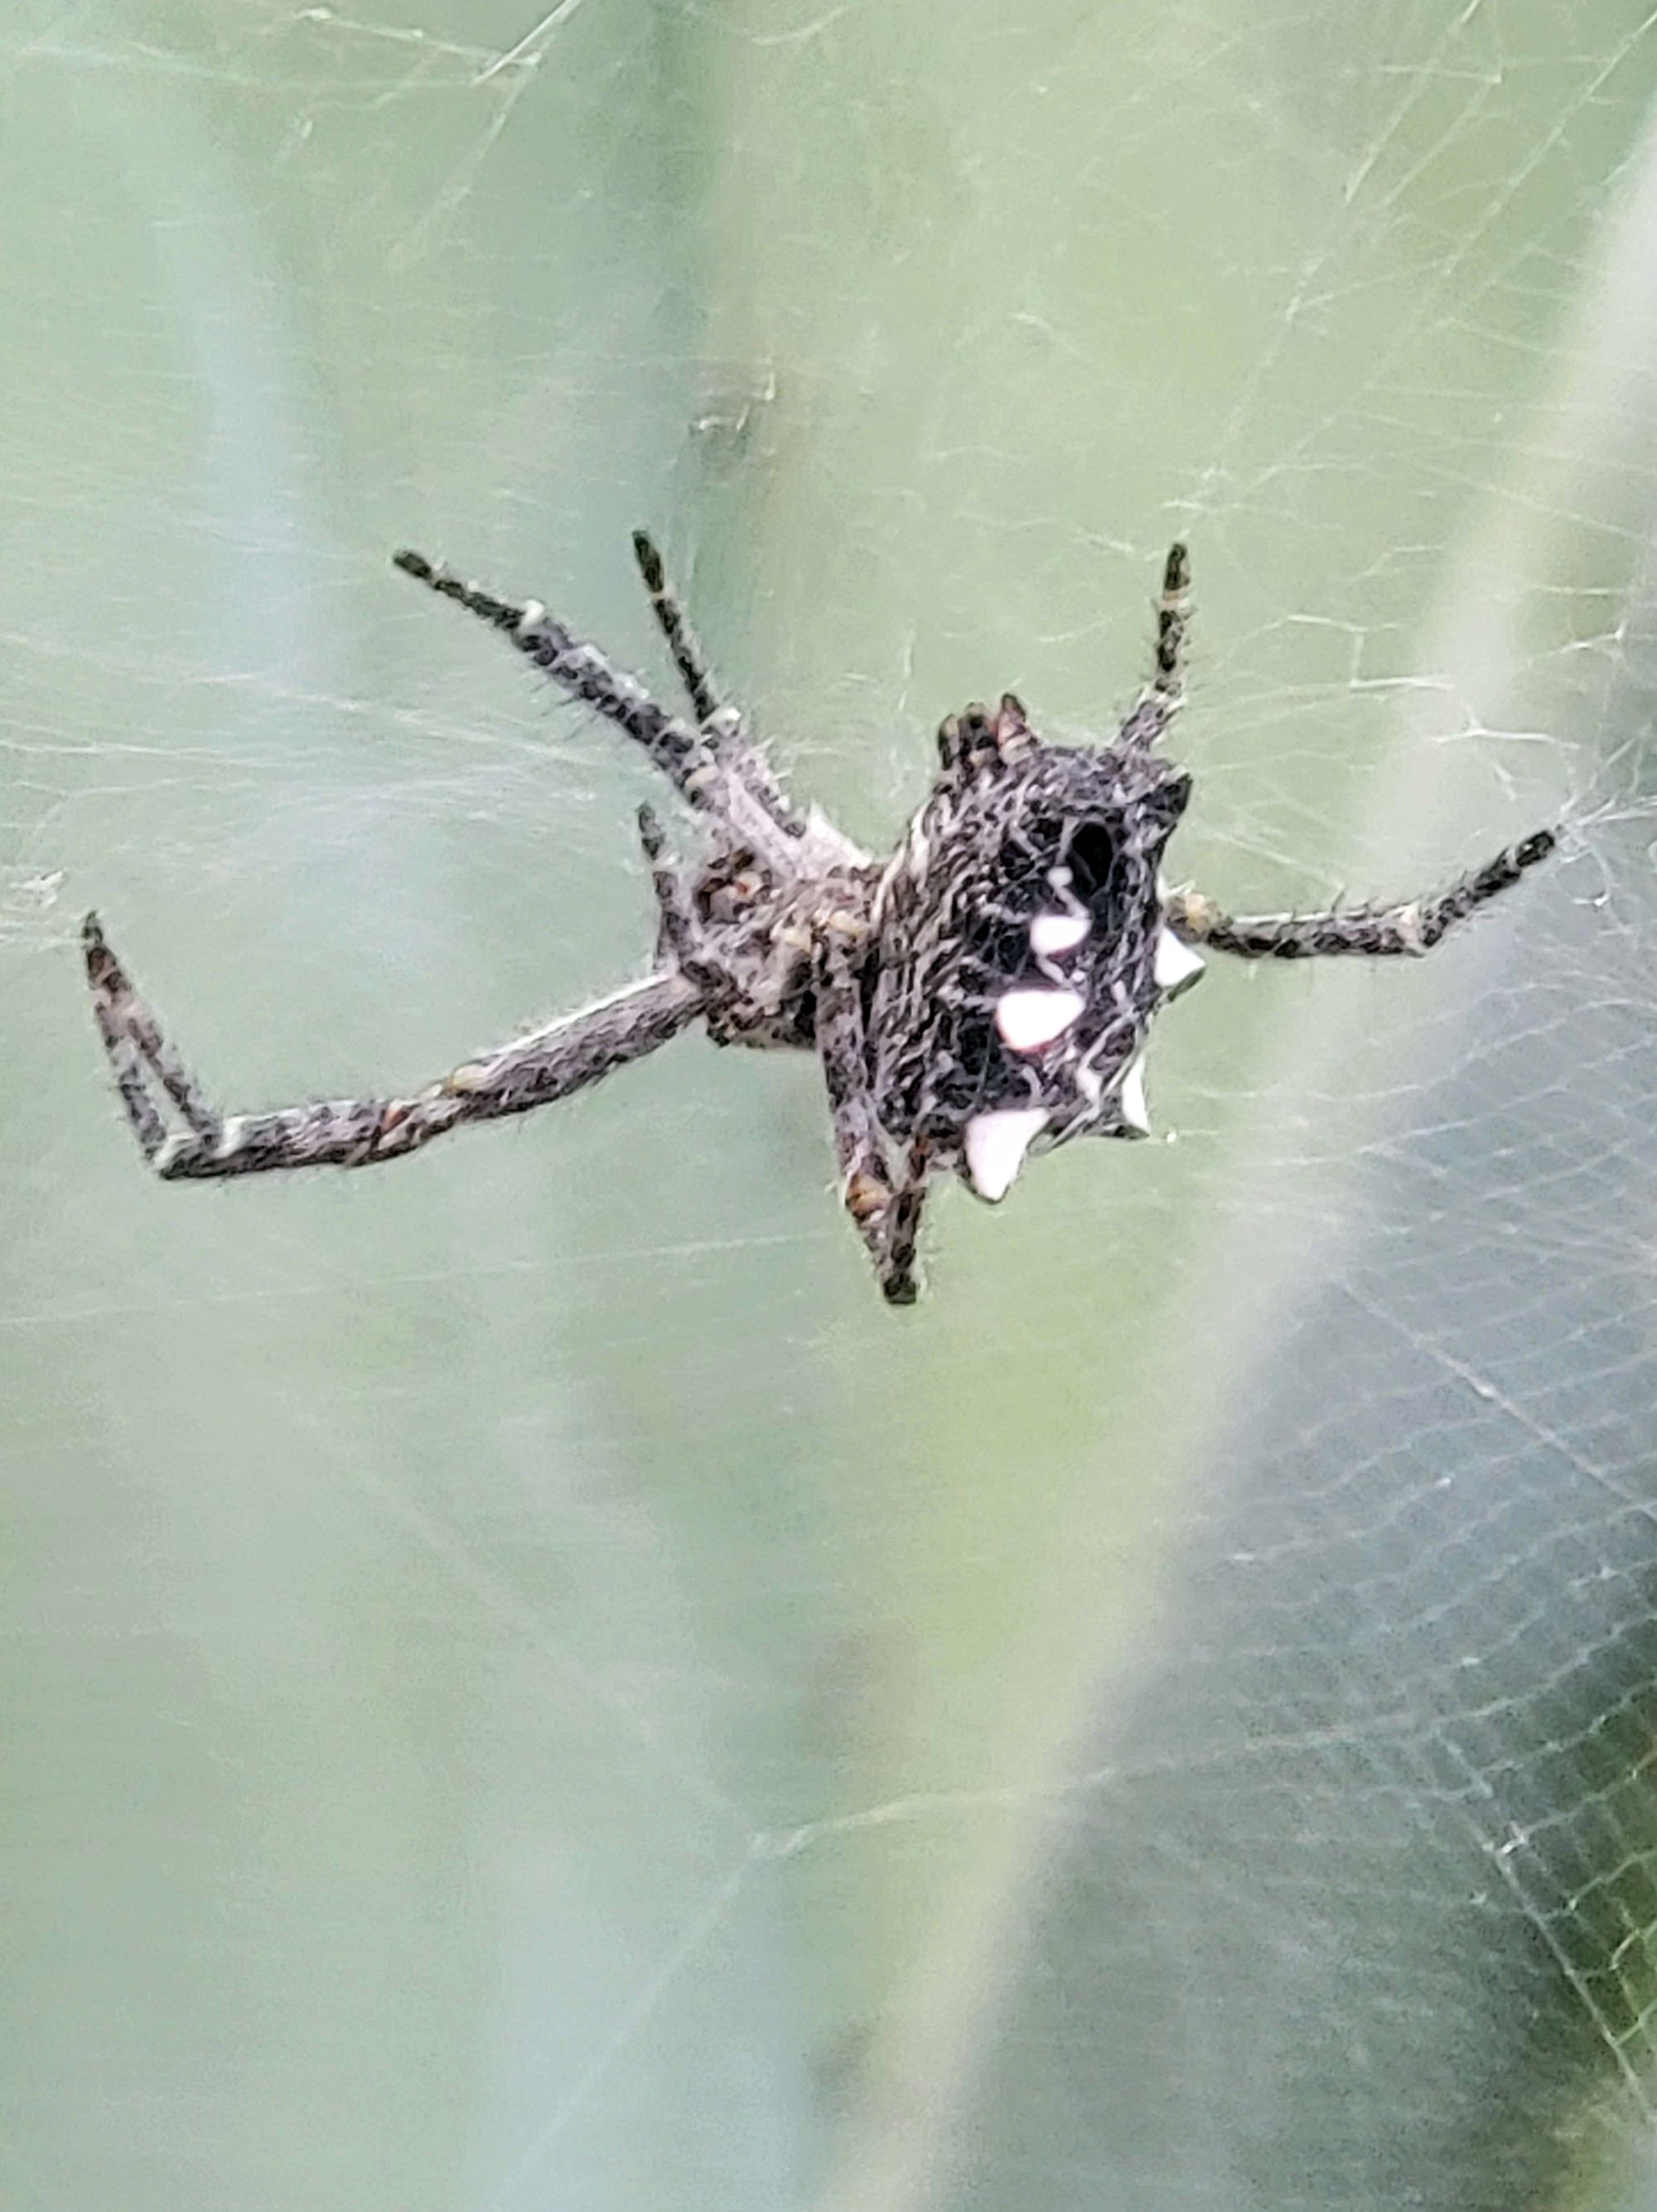 Sometimes if you actually stop biking and look at something else, you can enjoy actual non-landscape nature! Like this Tropical Ten-Web-Spider living in the cactus